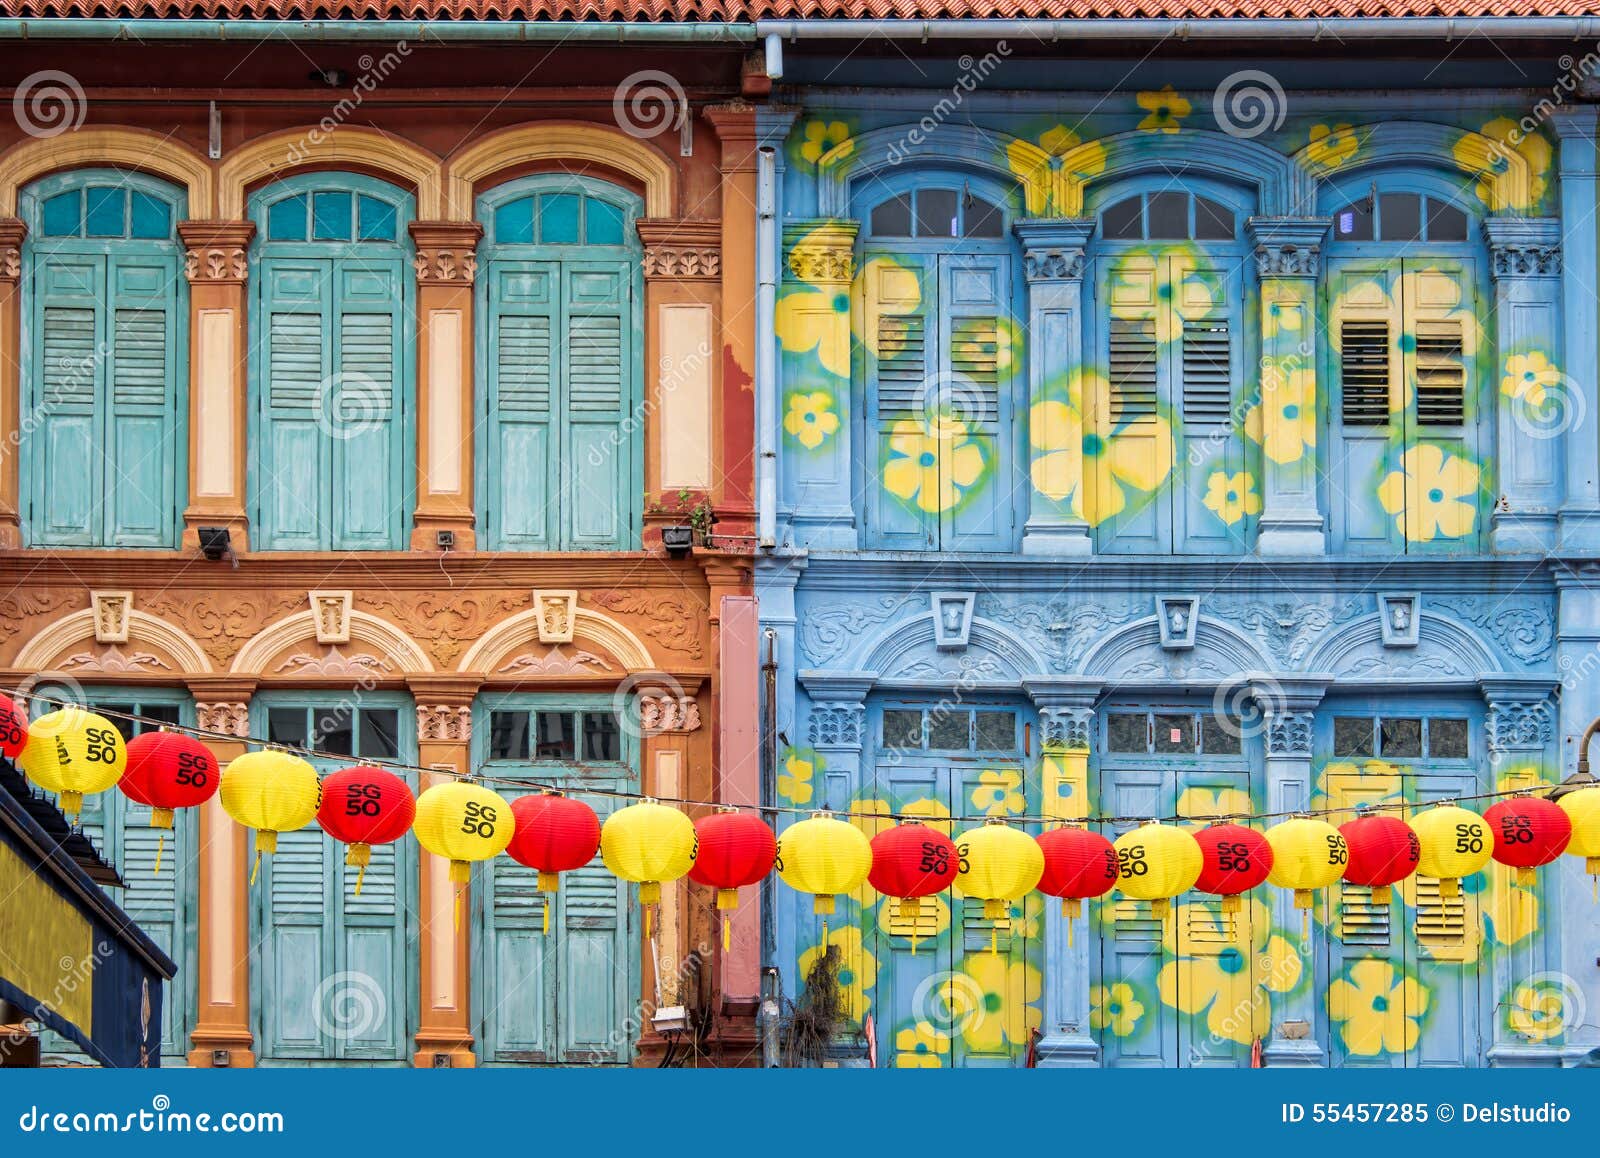 colorful house facades in chinatown, singapore